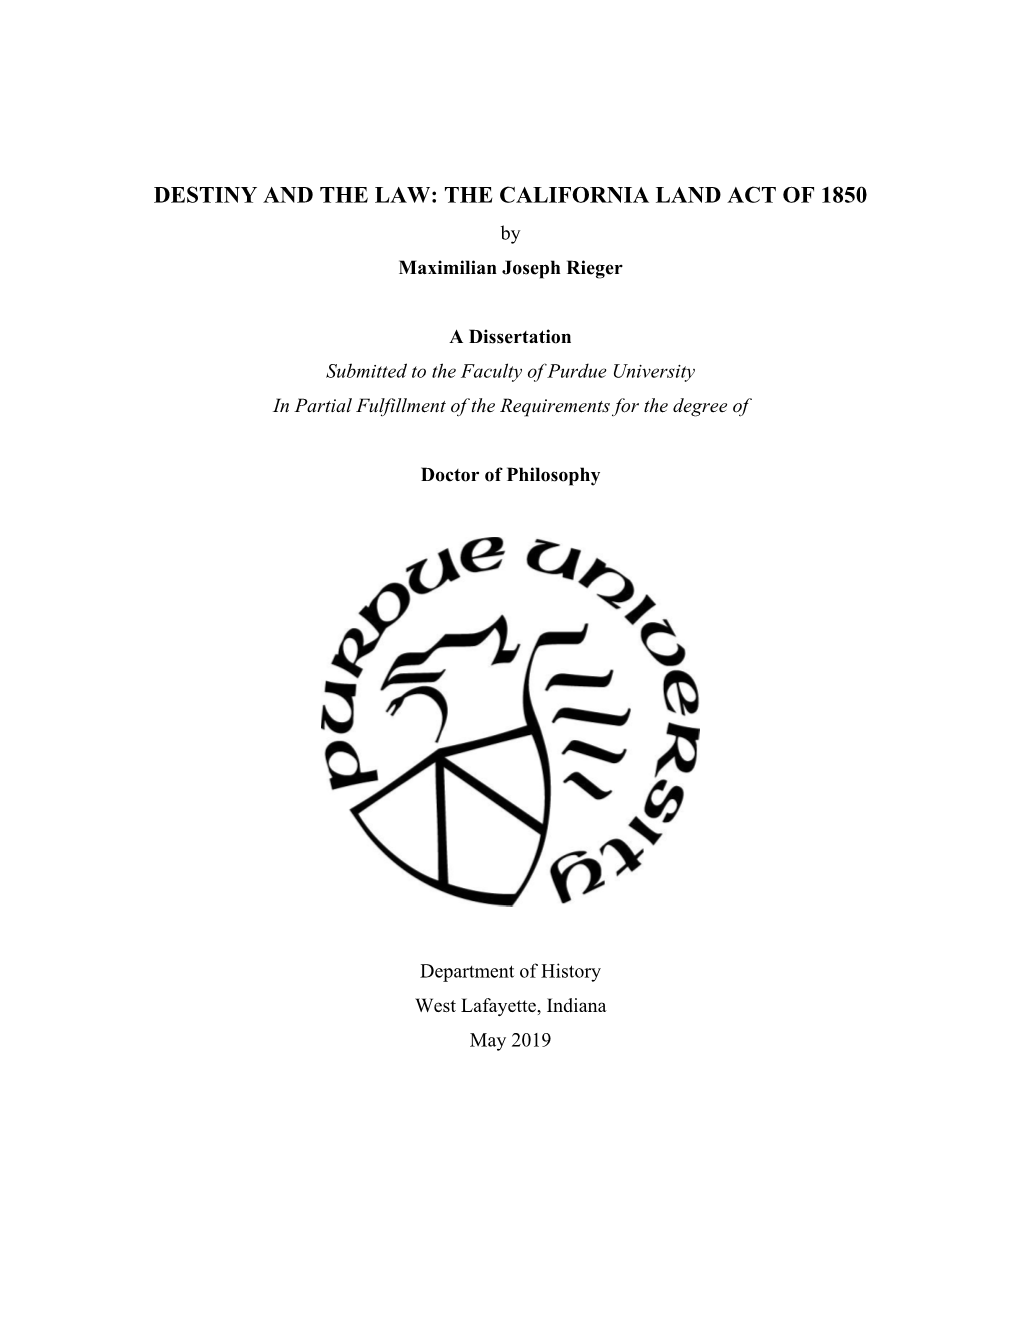 DESTINY and the LAW: the CALIFORNIA LAND ACT of 1850 by Maximilian Joseph Rieger